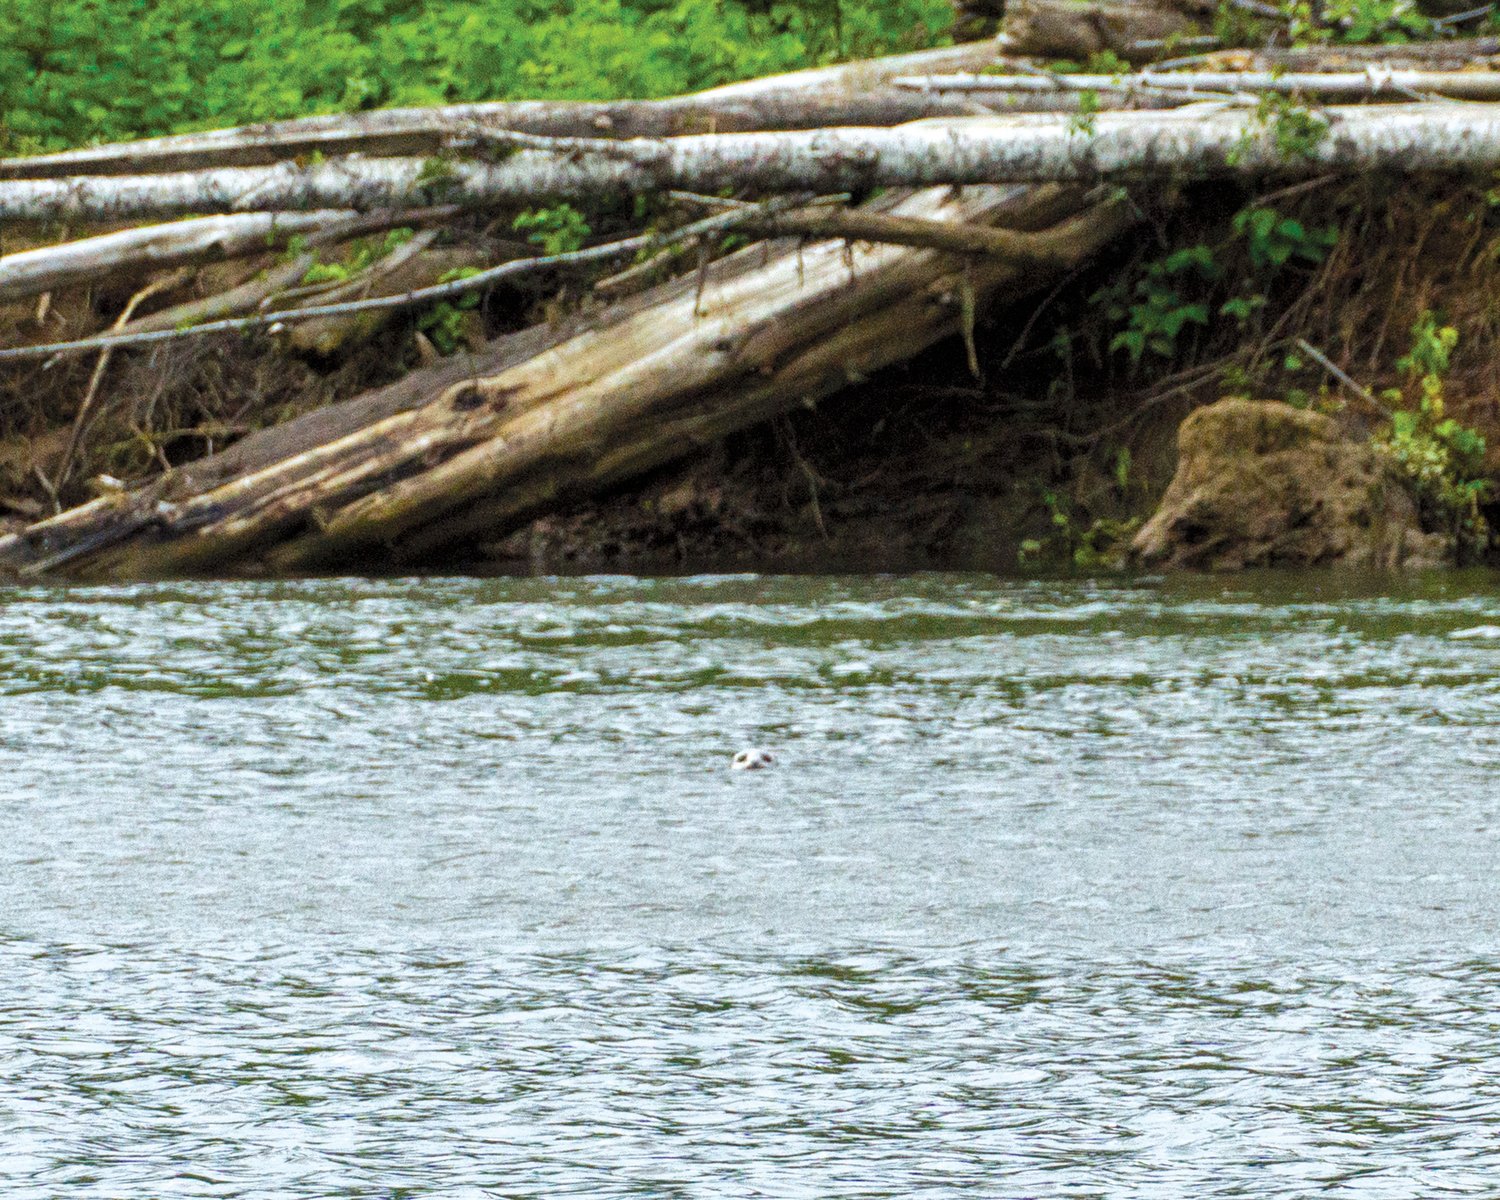 A seal looks across the Chehalis River at kayakers on shore.